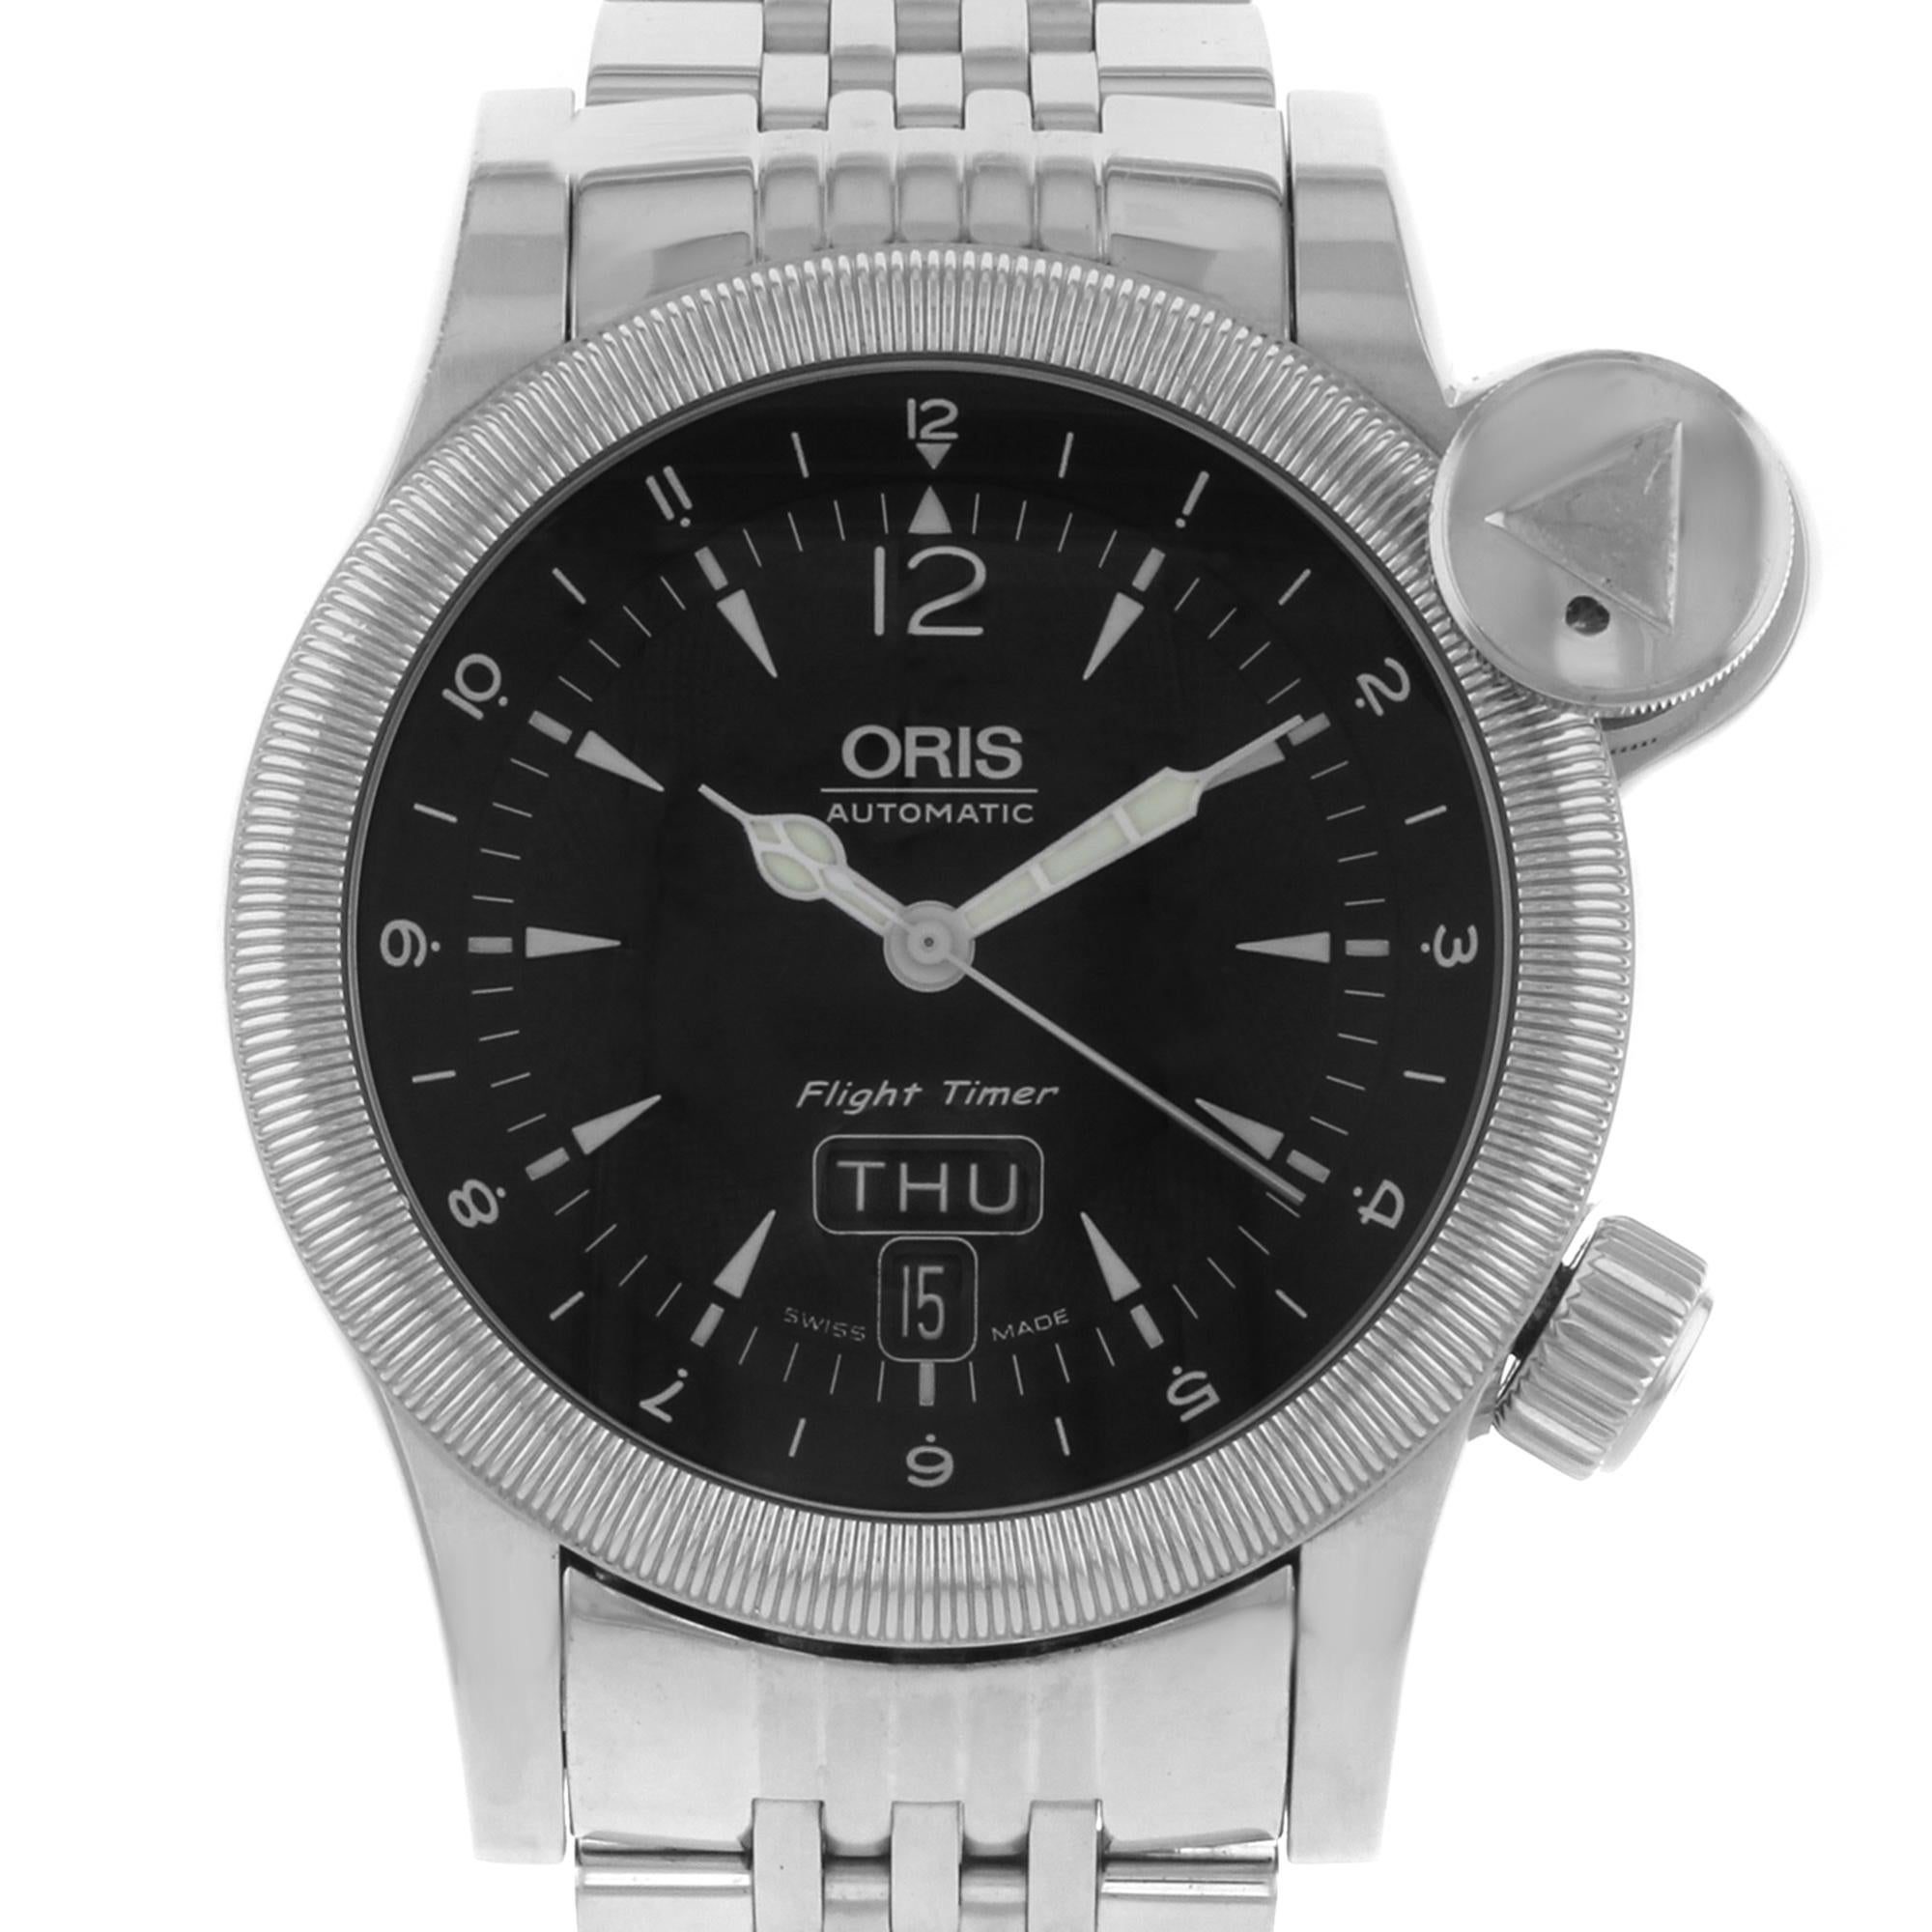 This pre-owned Oris Flight Timer 63575684064  is a beautiful men's timepiece that is powered by mechanical (automatic) movement which is cased in a stainless steel case. It has a round shape face, chronograph, day and date dial and has hand sticks